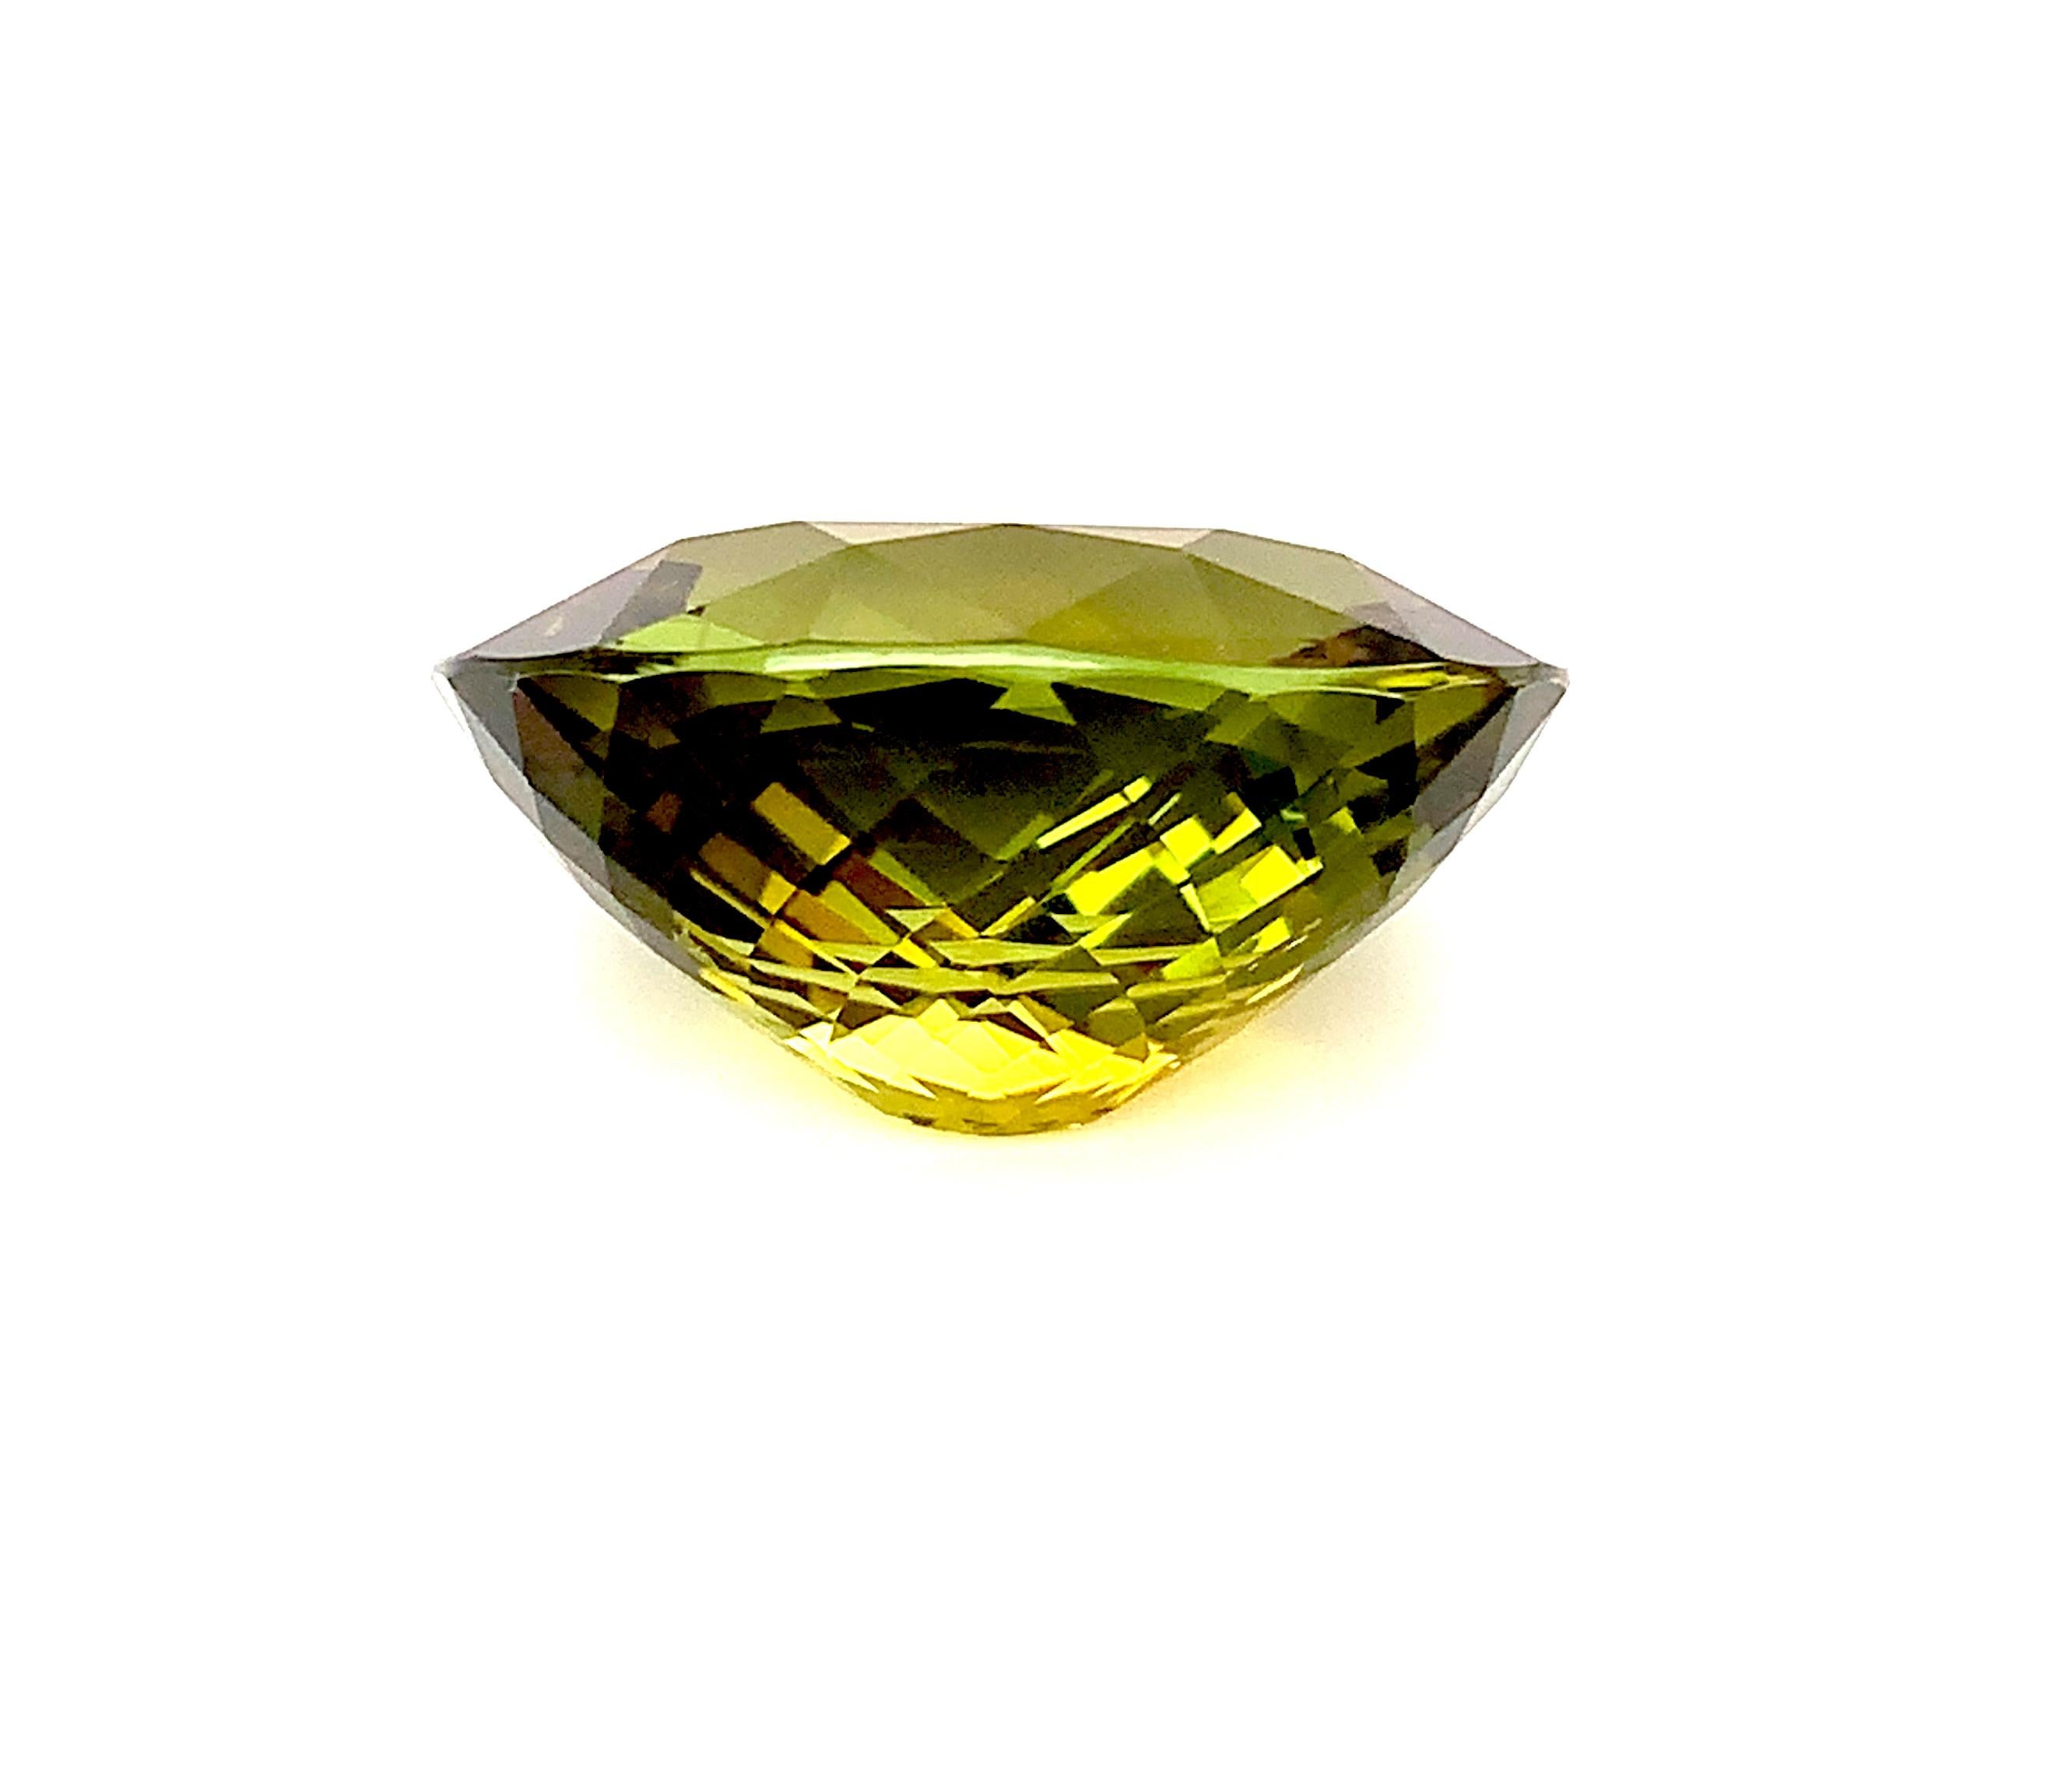  79.78 Carat Golden Olive Tourmaline Oval, Loose Gemstone, GIA Certified ...A For Sale 1